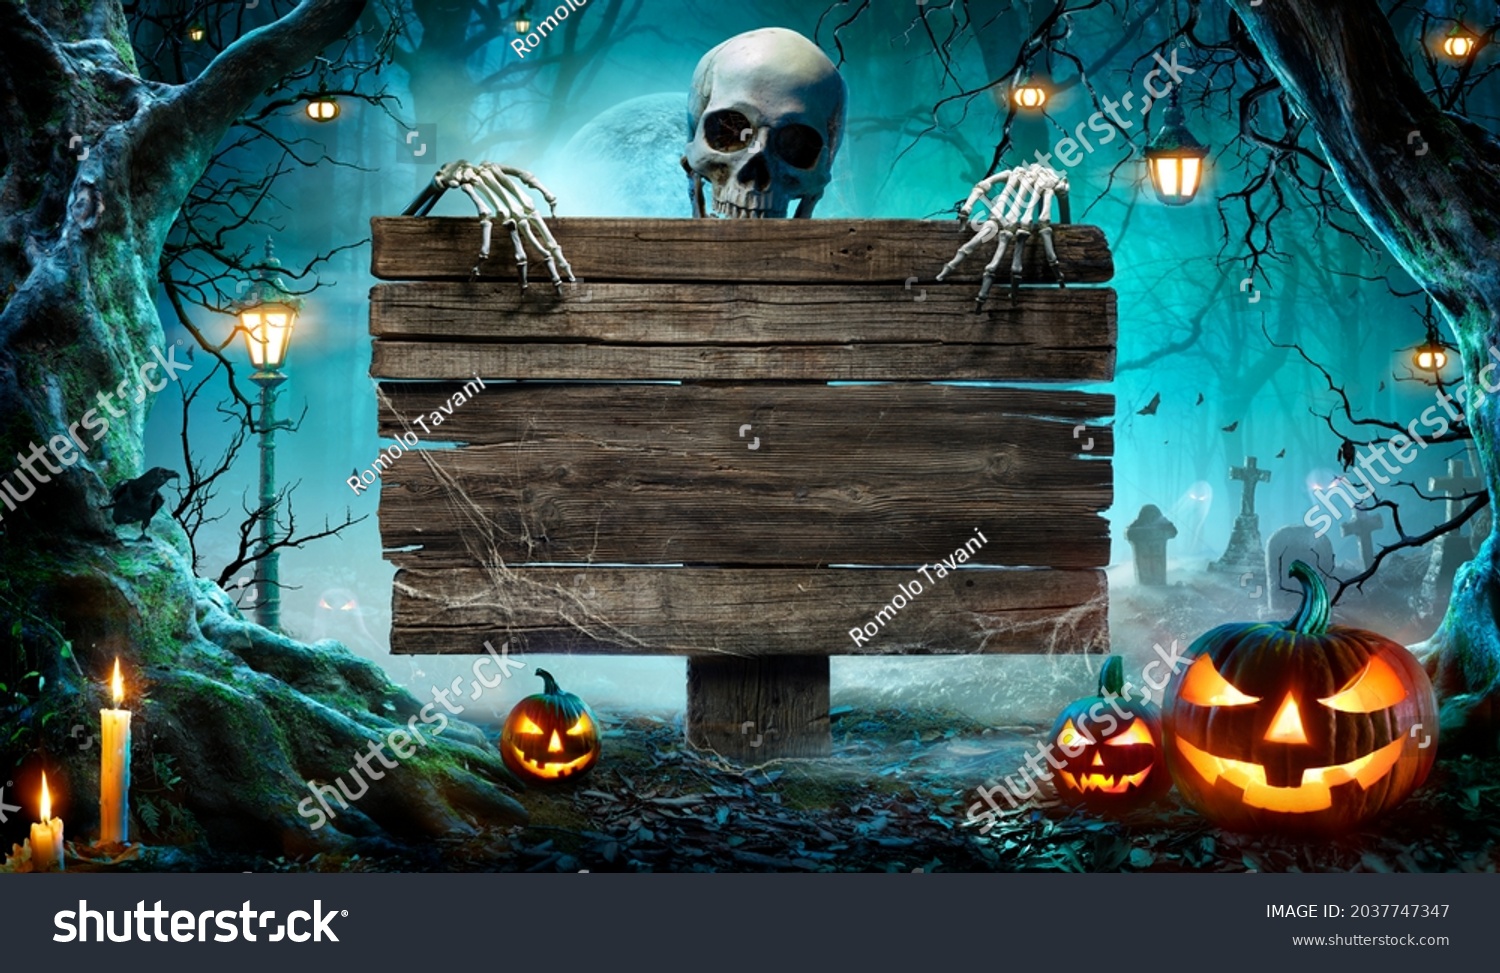 Halloween Party Card - Pumpkins And Skeleton In Graveyard At Night With Wooden Board  #2037747347